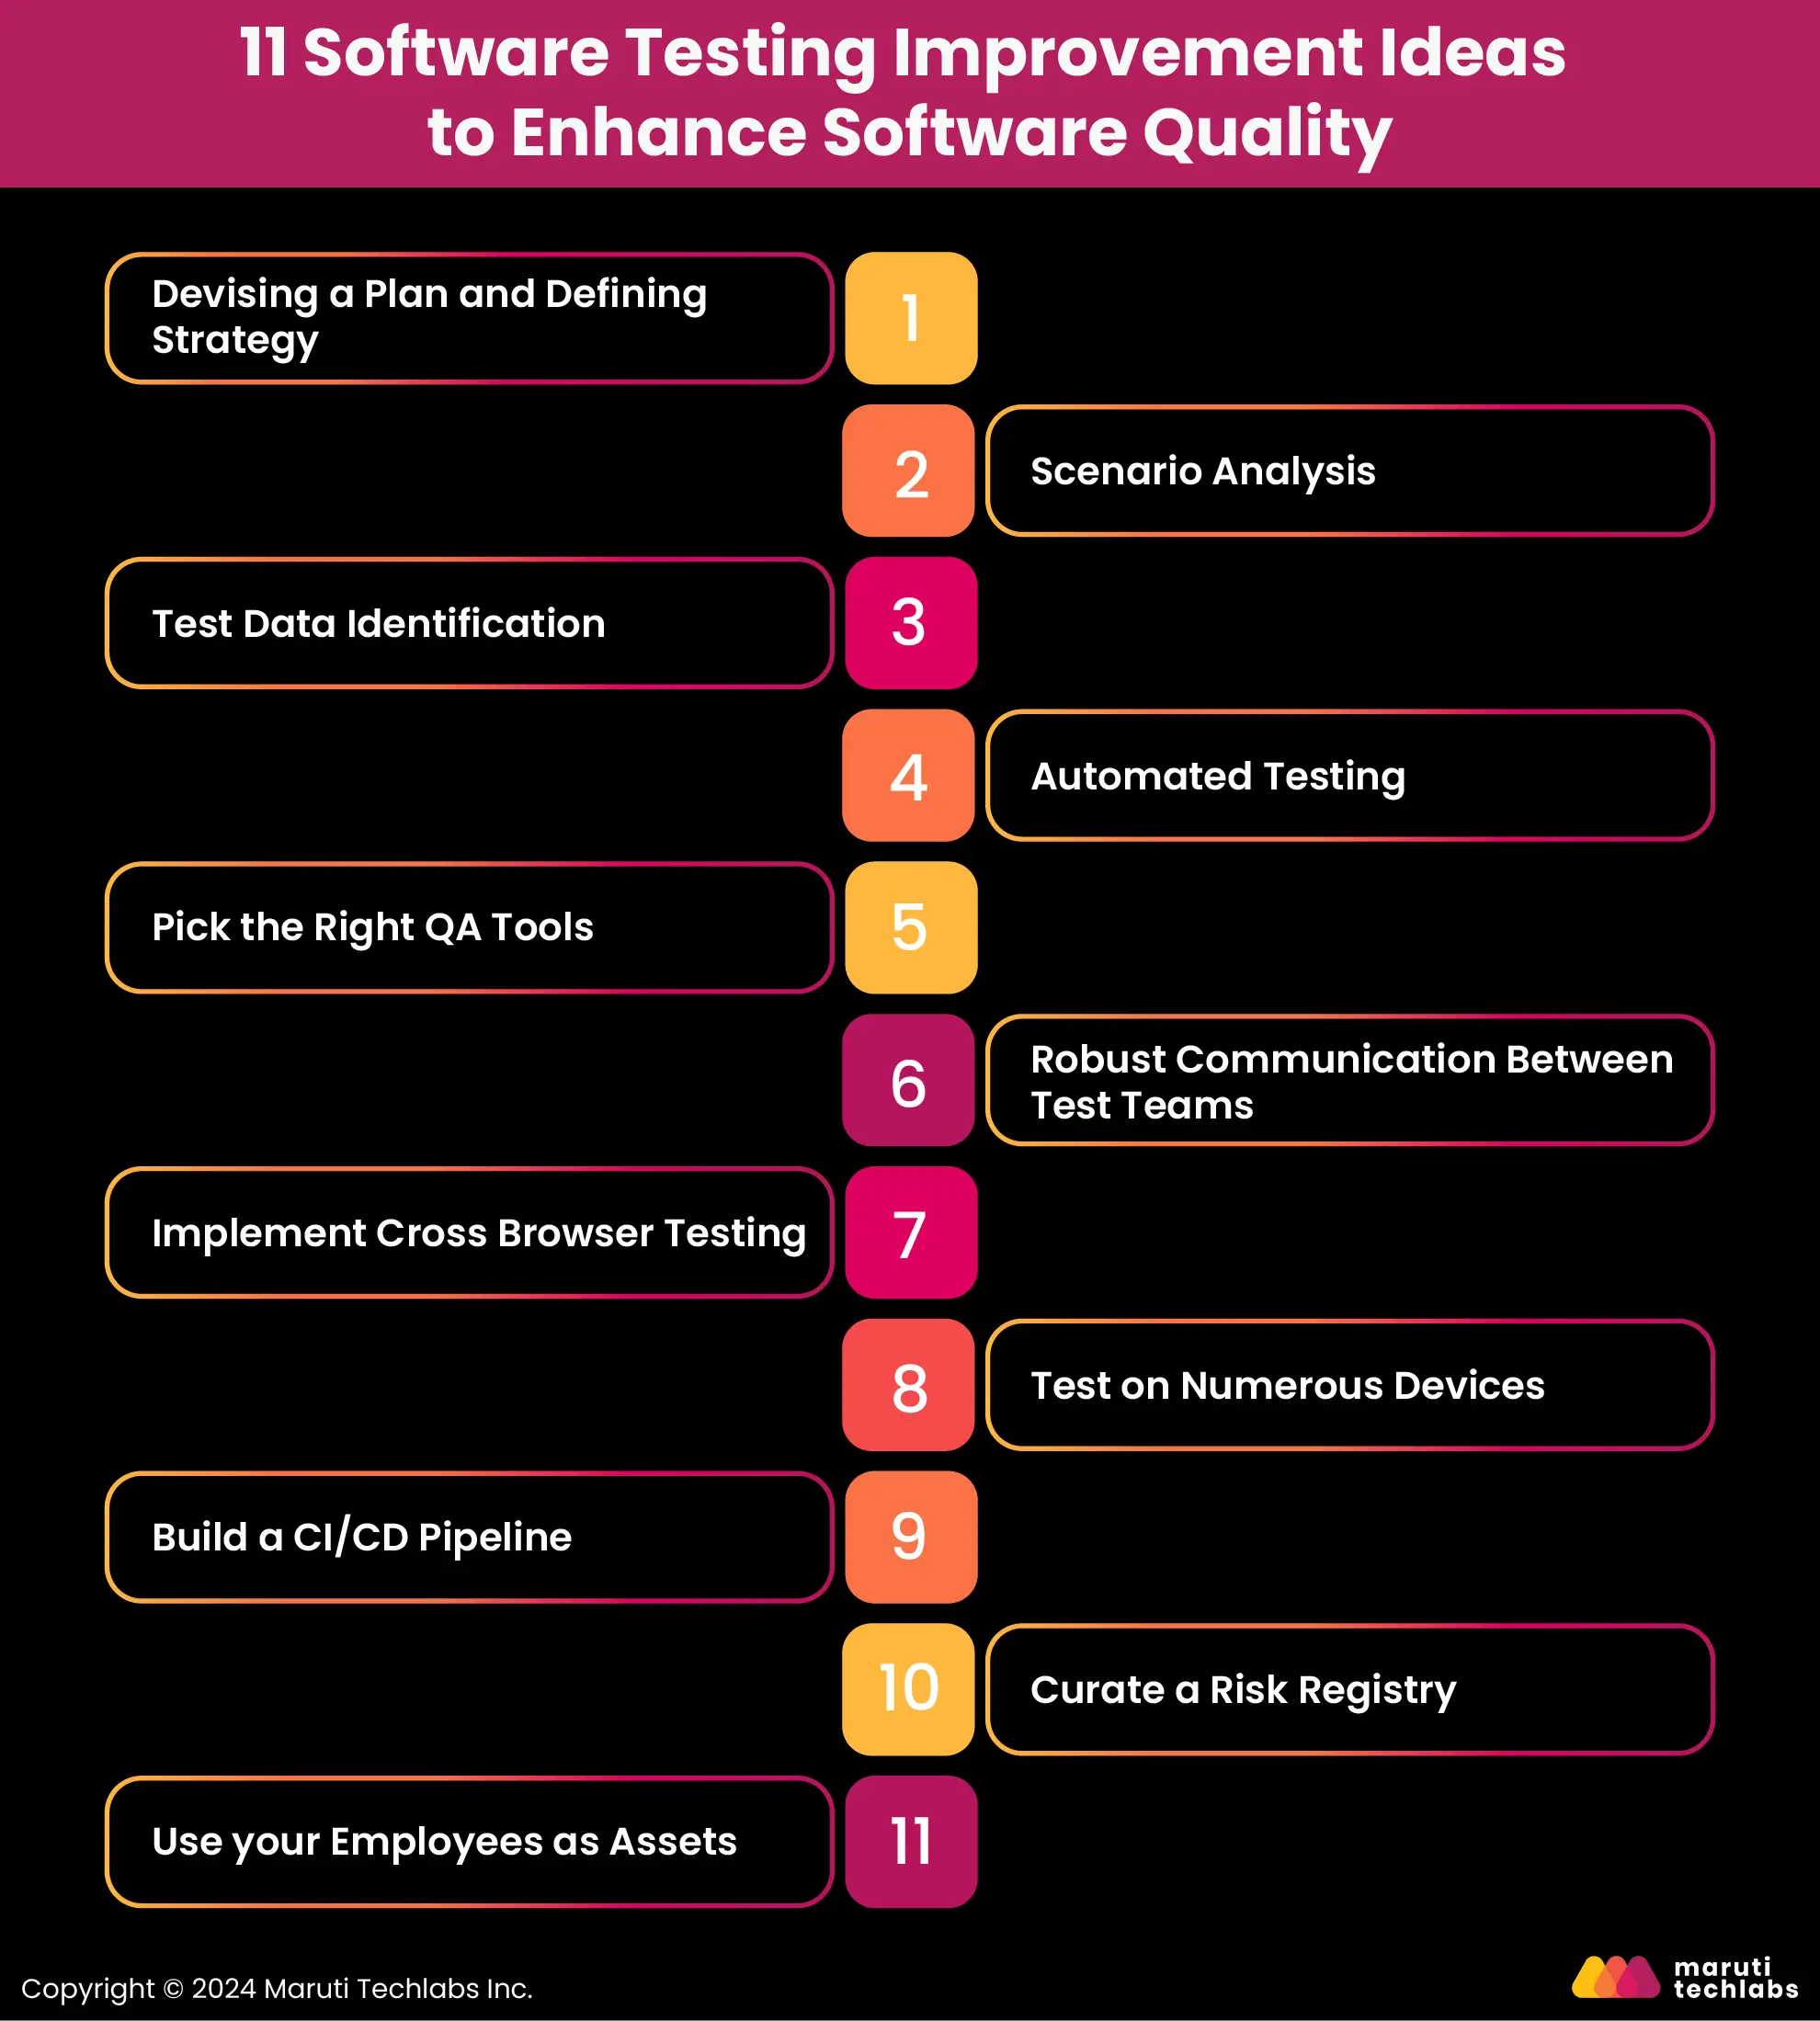 11 Software Testing Improvement Ideas to Enhance Software Quality